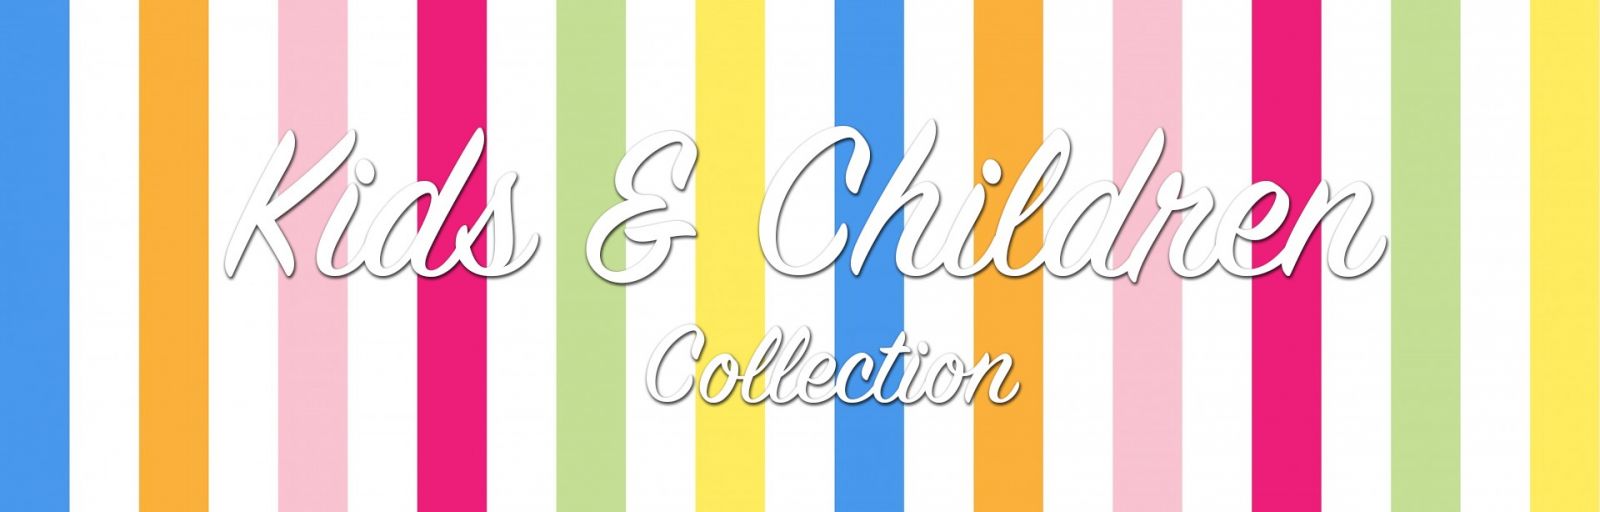 Kids and Children Collection